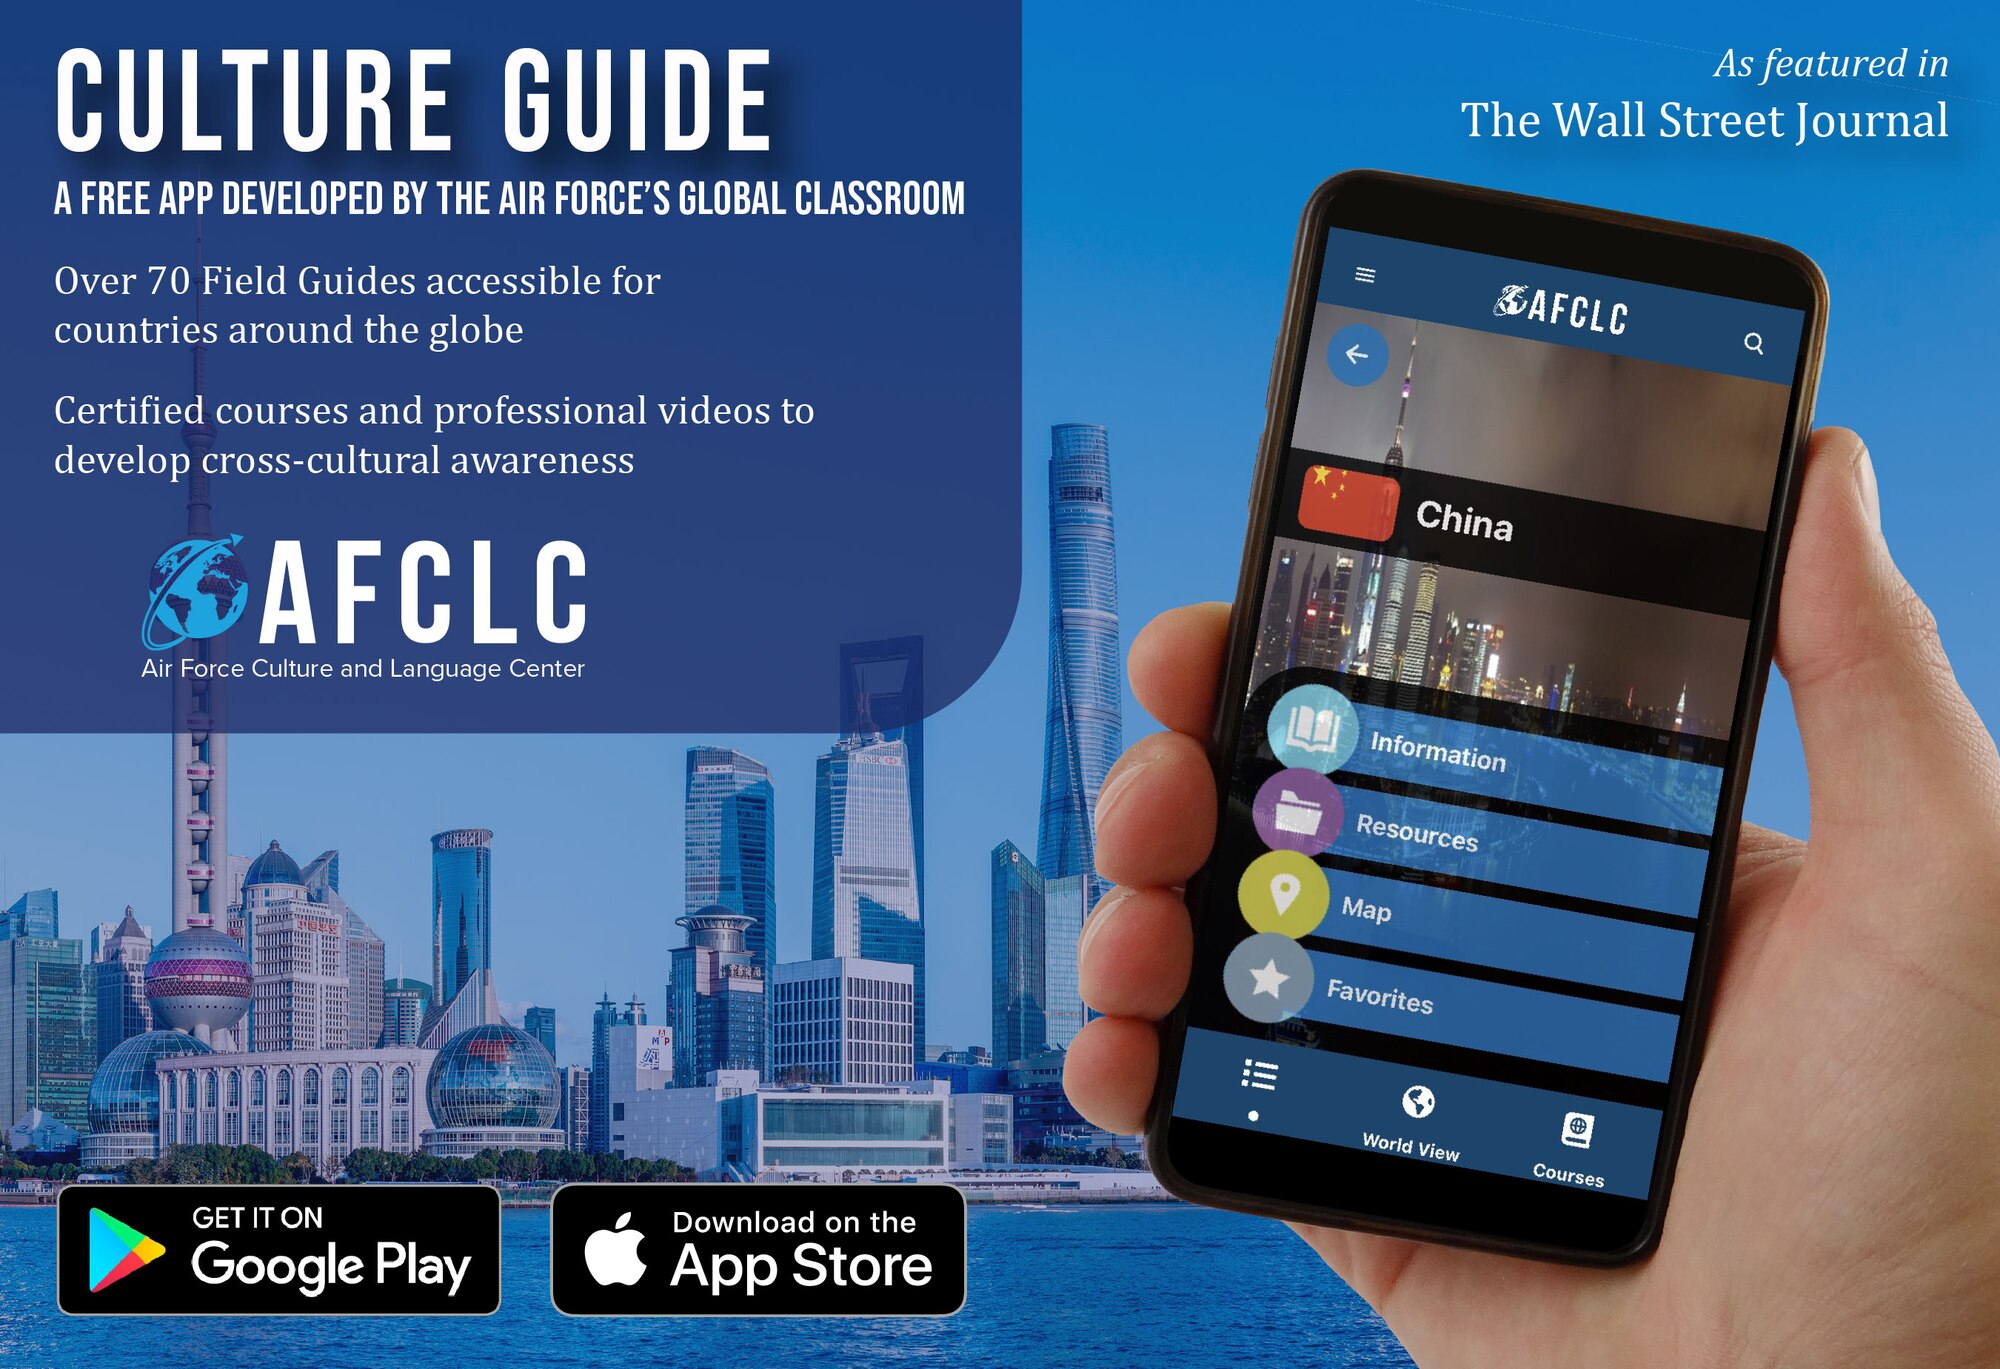 AFCLC’s Culture Guide app is available to all military service members and civilians through the App Store and Google Play, and it is safe for Department of Defense mobile devices. More than 20,000 individuals are already utilizing the app, and for those individuals, an update is now available.